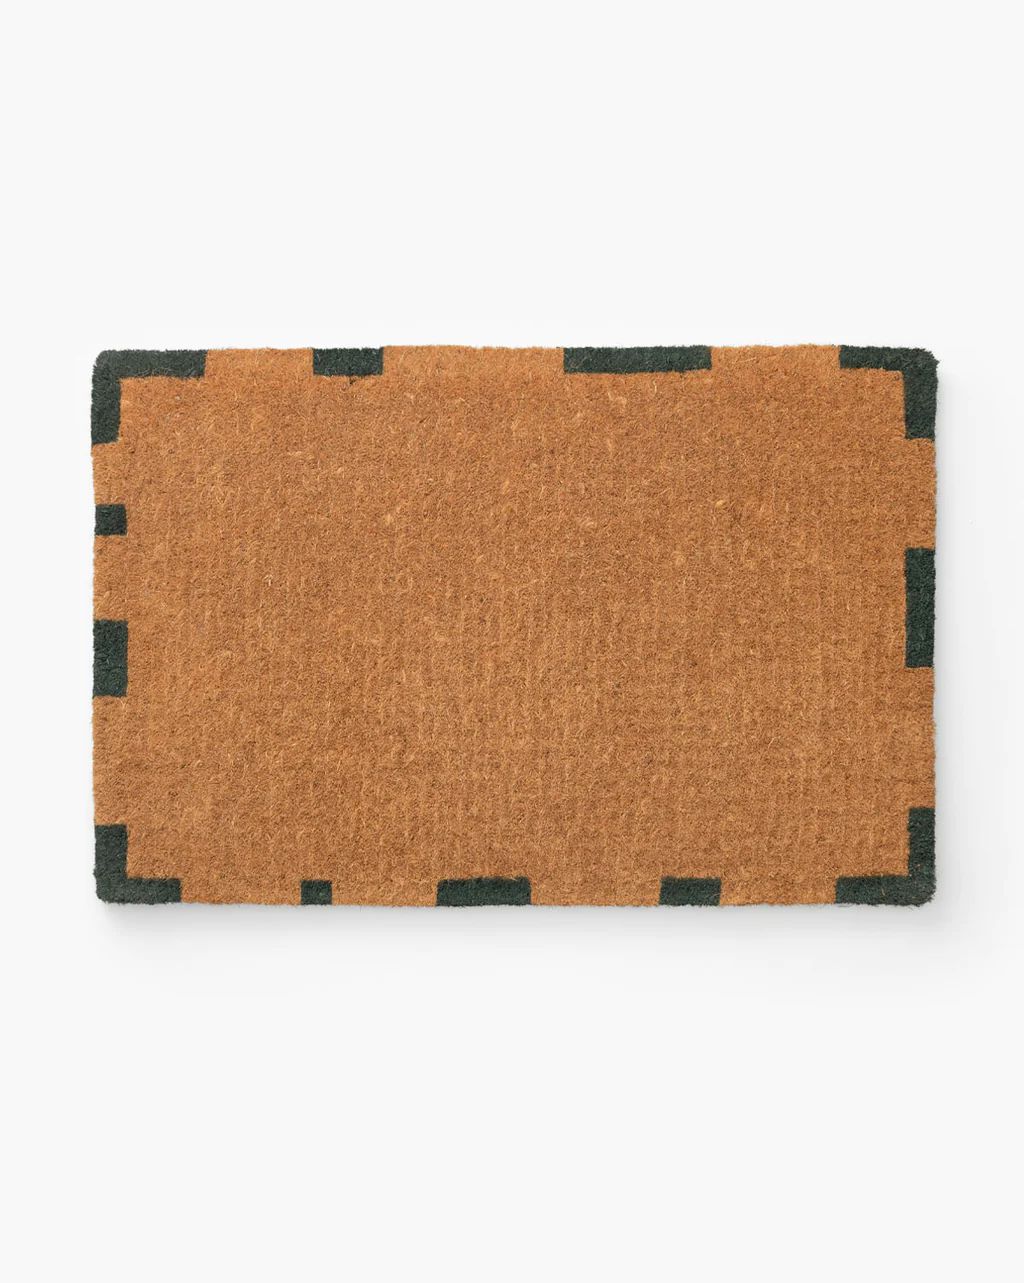 Dashed Border Doormat | McGee & Co.